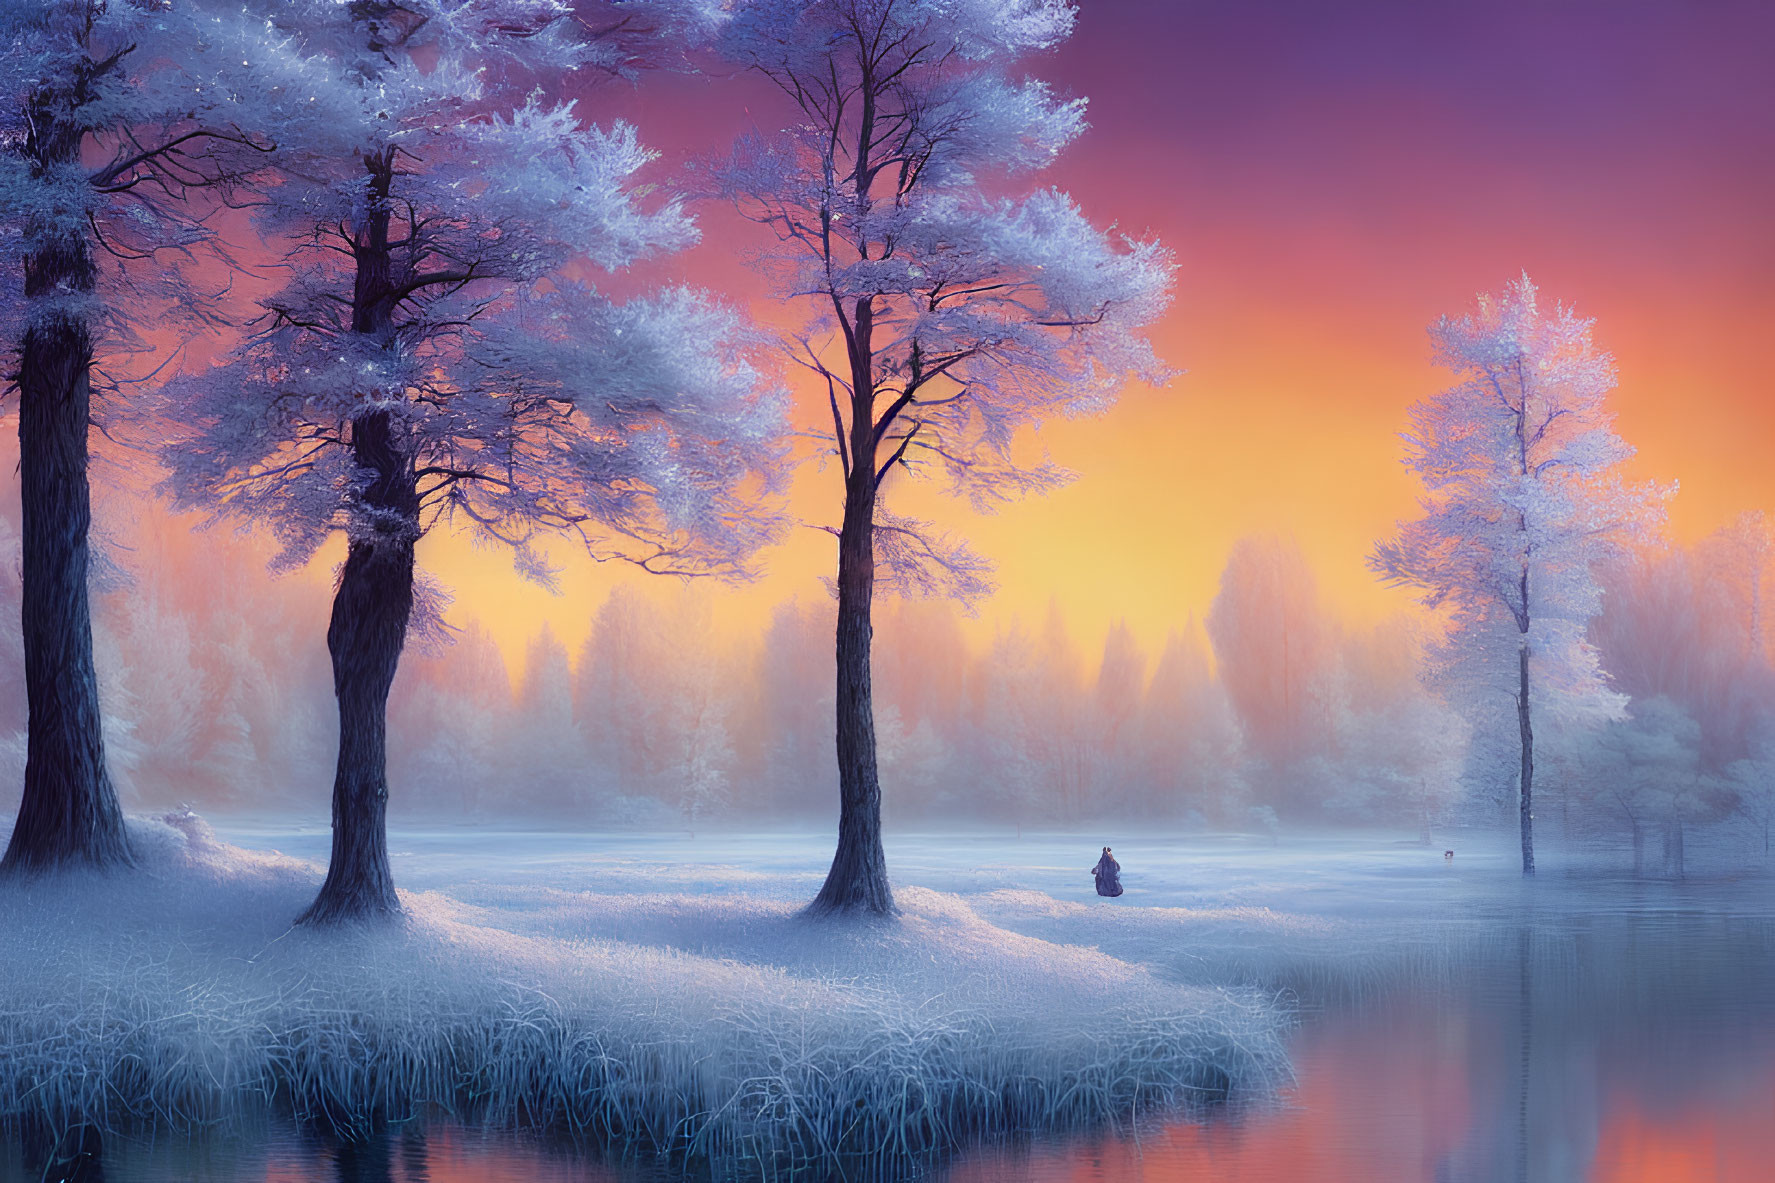 Winter landscape: Frost-covered trees, sunset sky, lone figure by lake